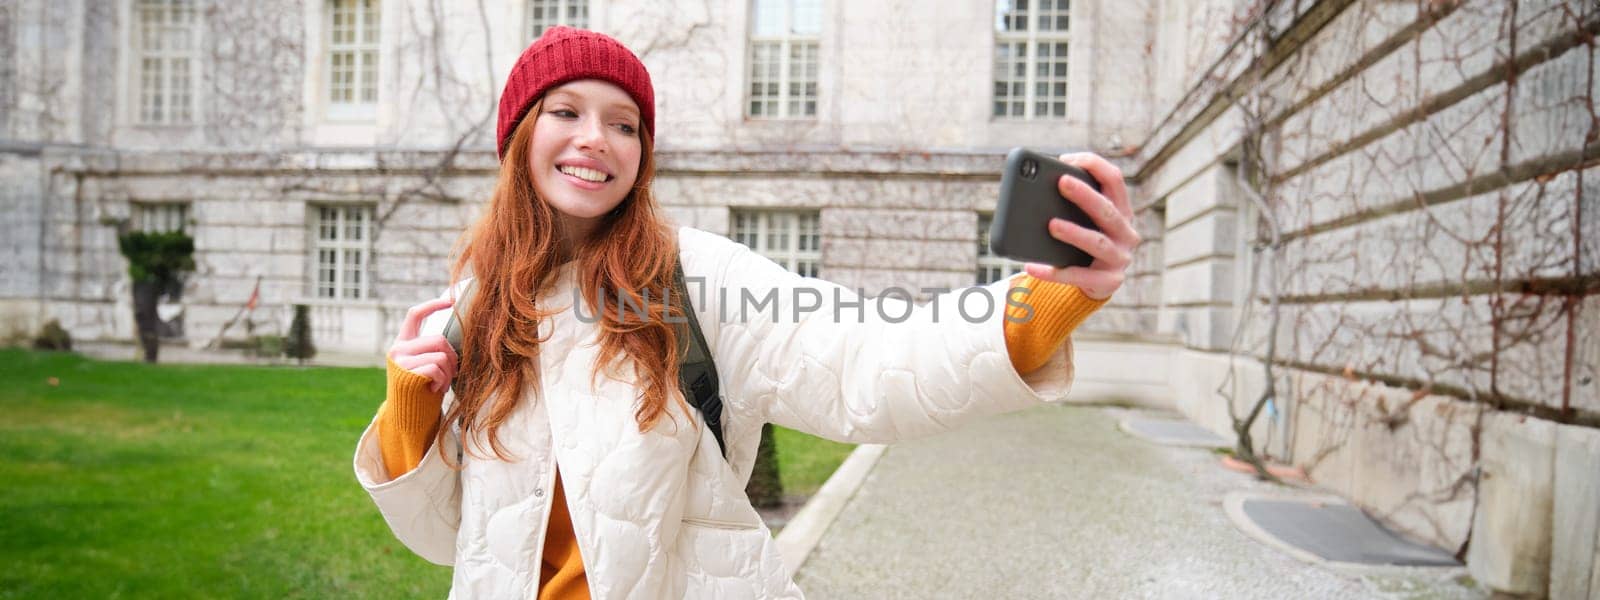 Portrait of happy girl tourist, takes selfie on smartphone in front of historical building, posing for photo on mobile phone camera.